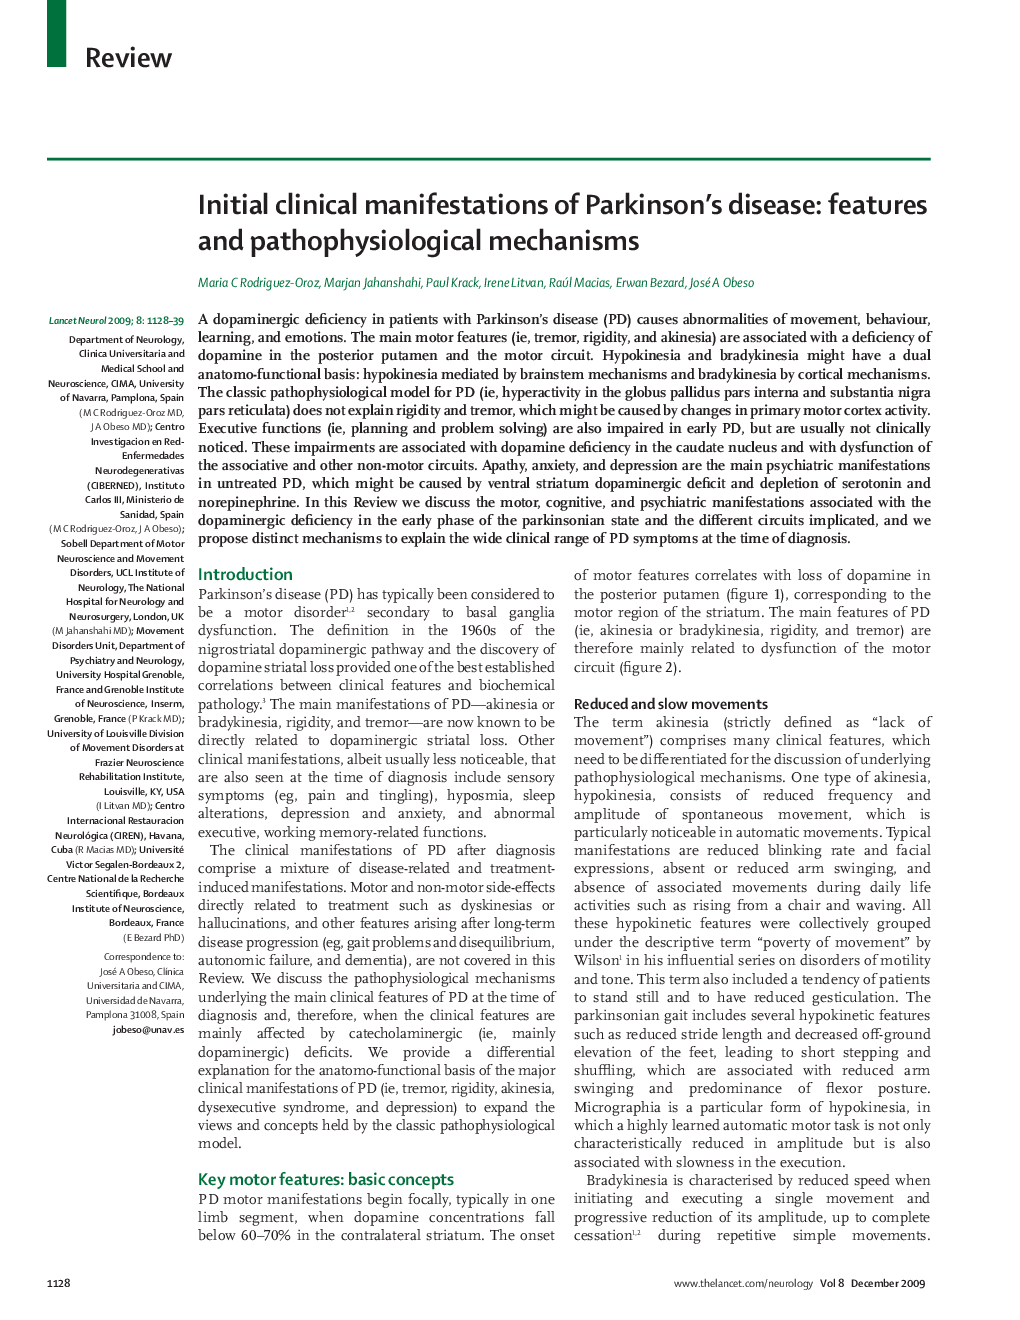 Initial clinical manifestations of Parkinson's disease: features and pathophysiological mechanisms